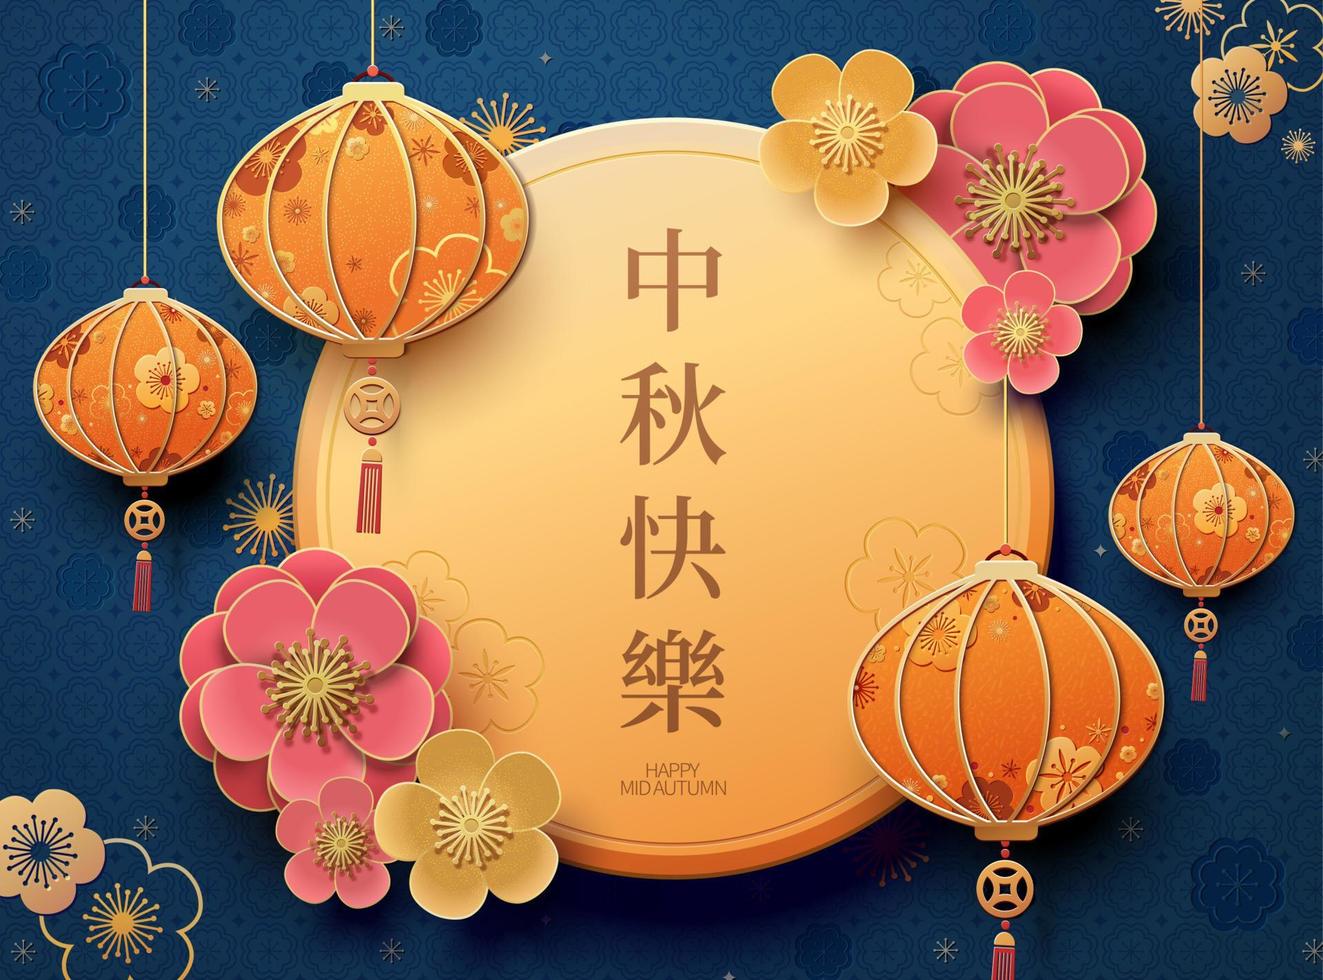 Happy Mid Autumn festival with hanging lanterns and flowers, Holiday name written in Chinese words vector